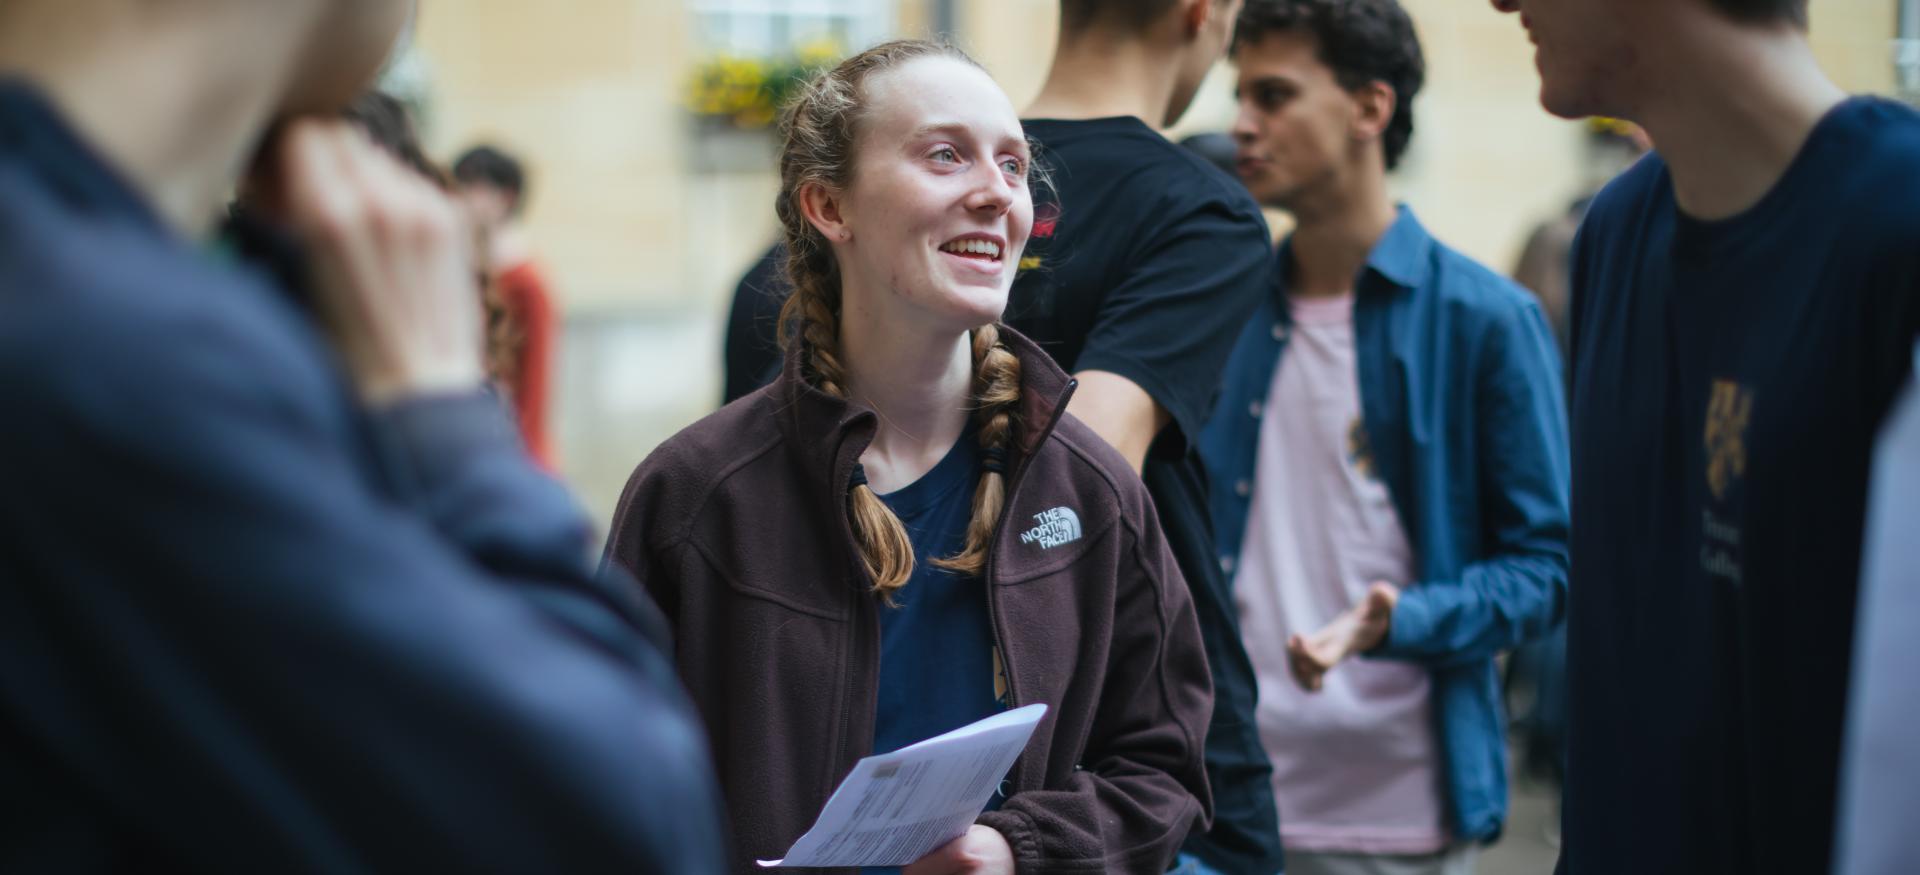 A female student smiles while gesturing to other students during open days.